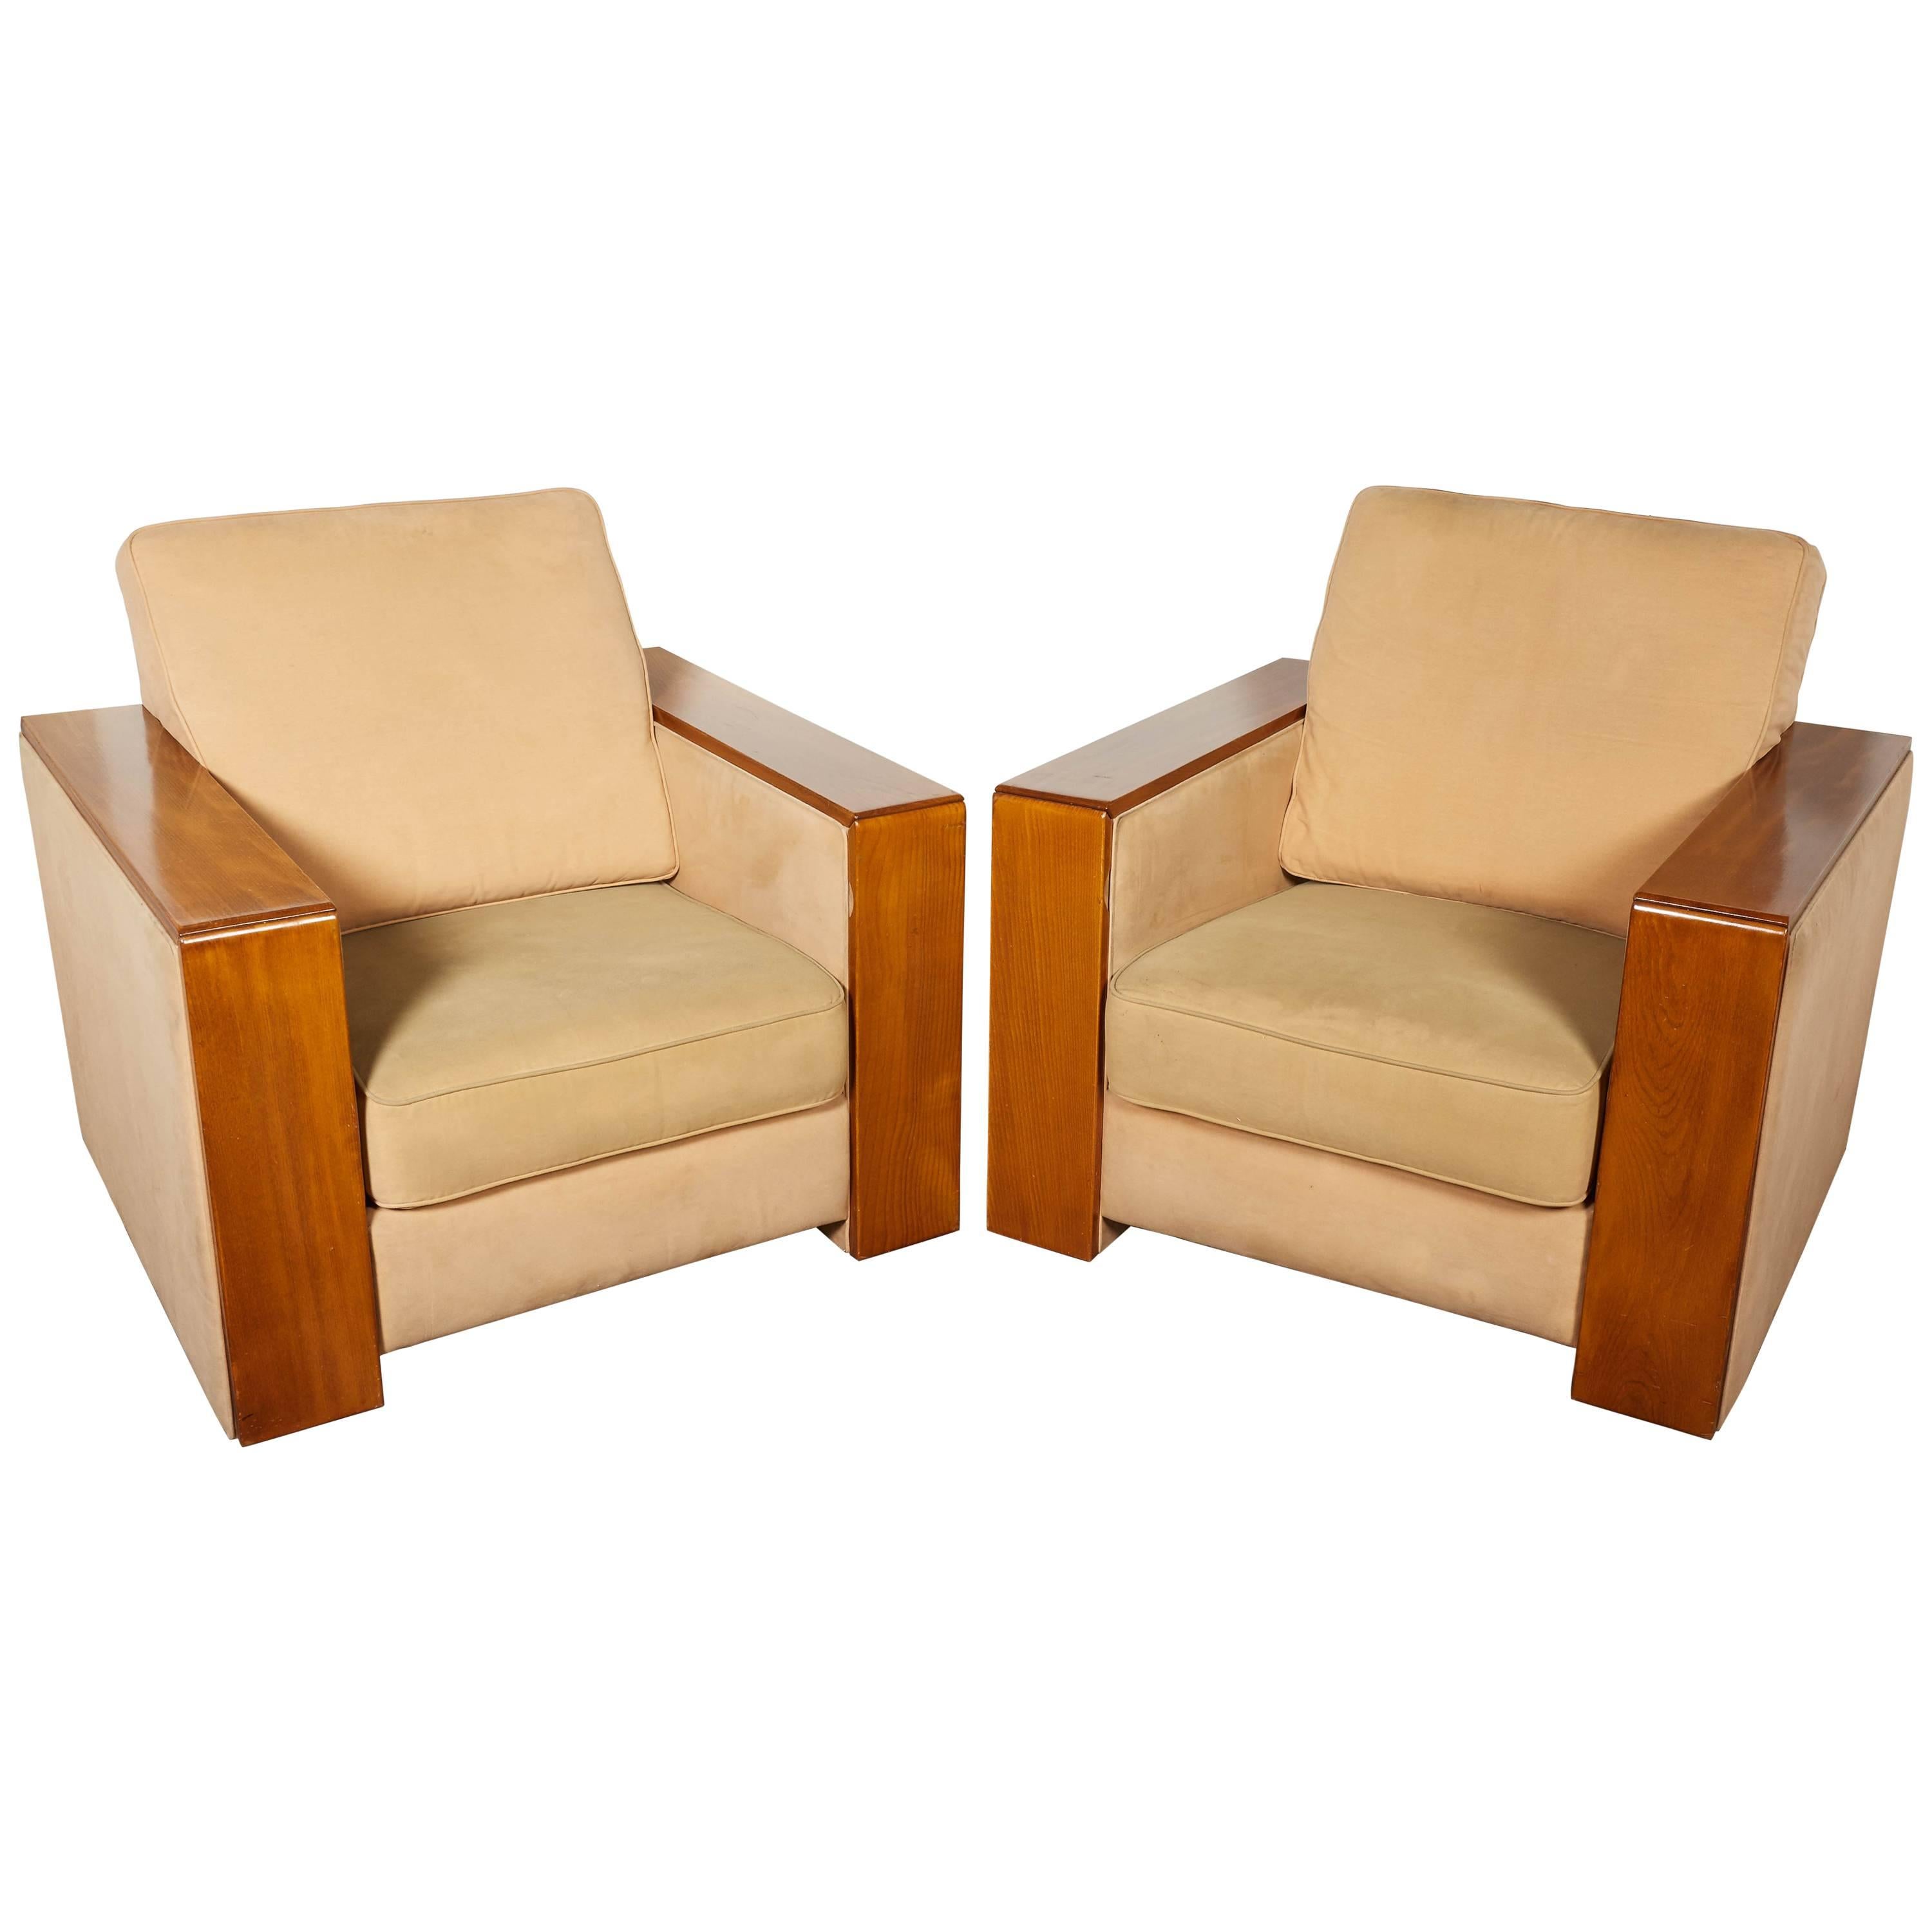 Pair of Large French Mid-Century Modern Wide Arm Cubist Club Chairs